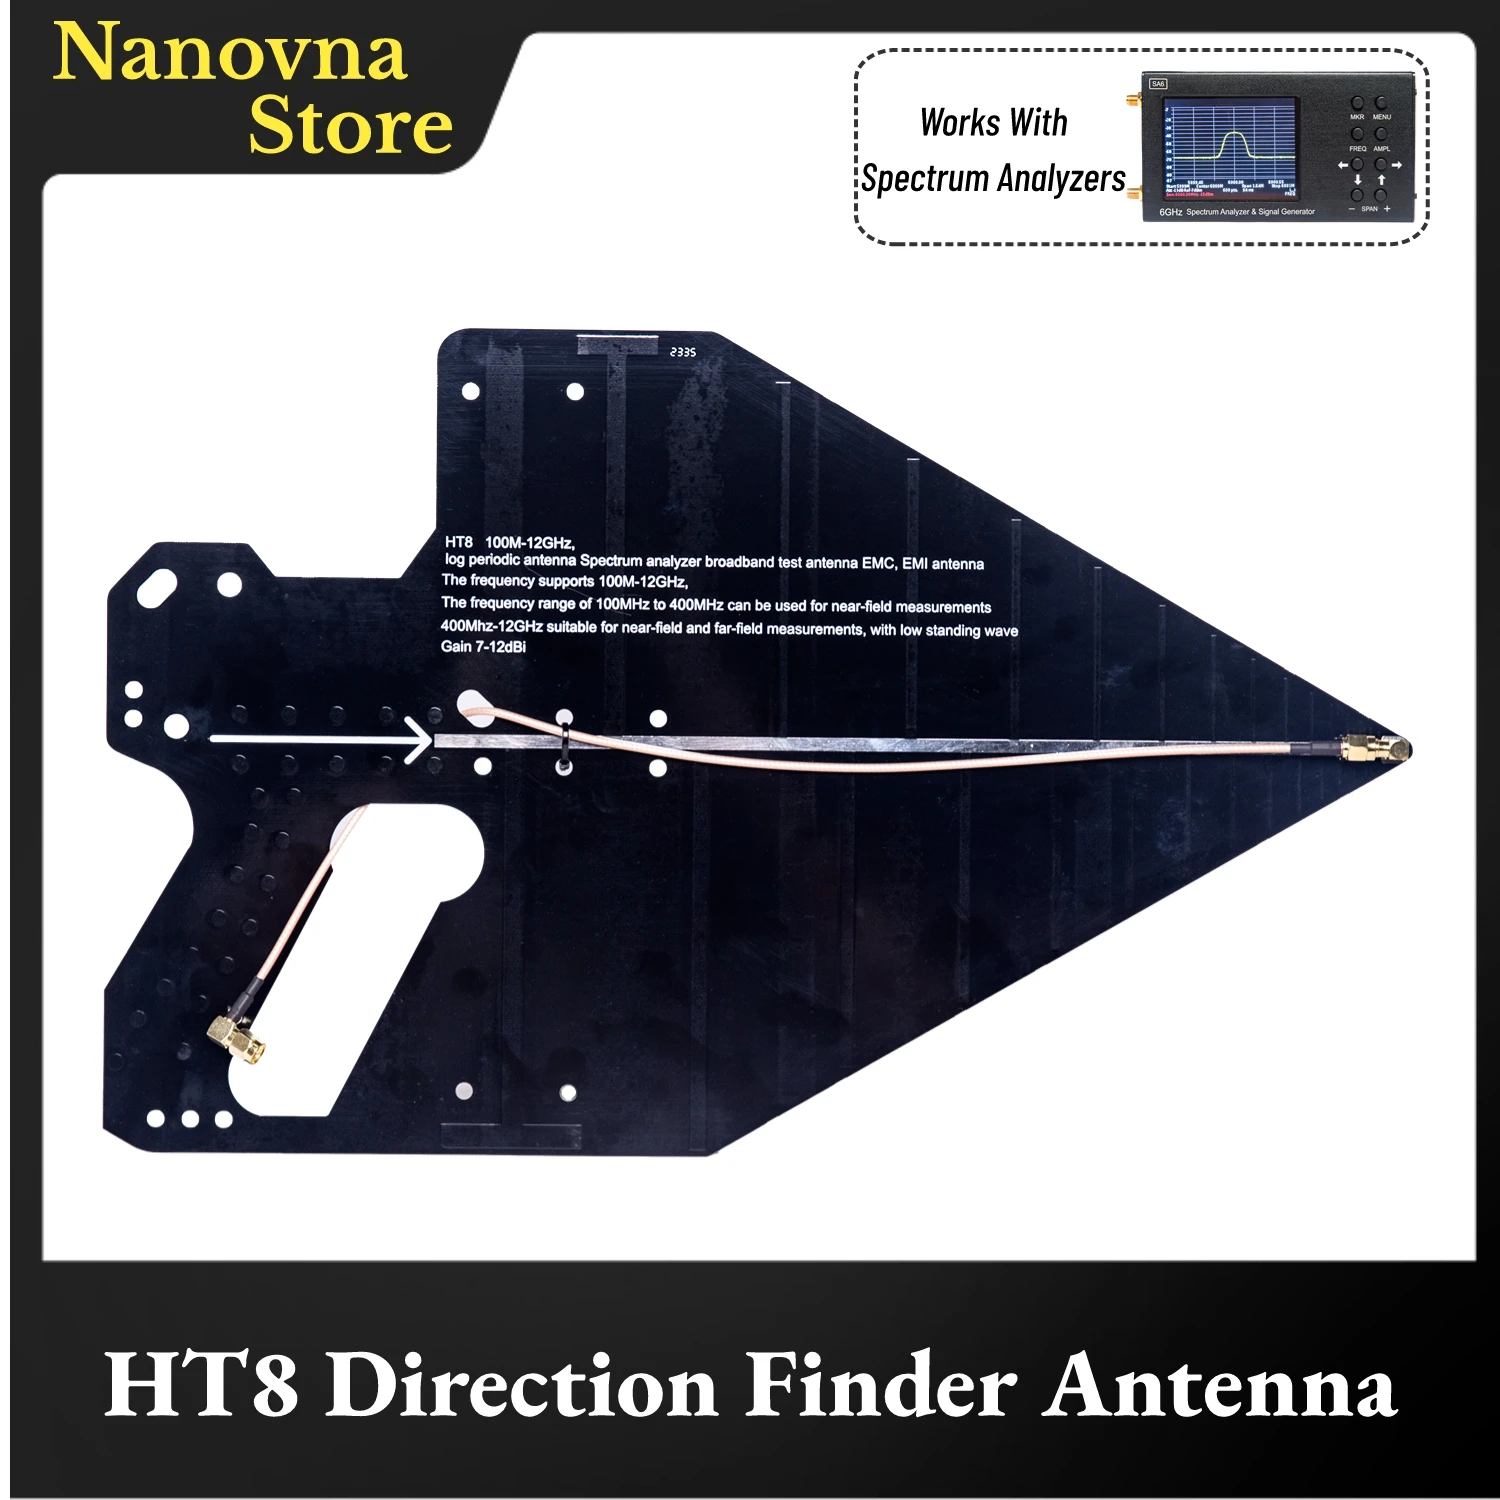 

HT8 Handheld Log Periodic Antenna 0.1-12GHz,Direction Finding Antenna for SA6 Spectrum Analyzer,Highly Accurate,Gain 7~12dBi